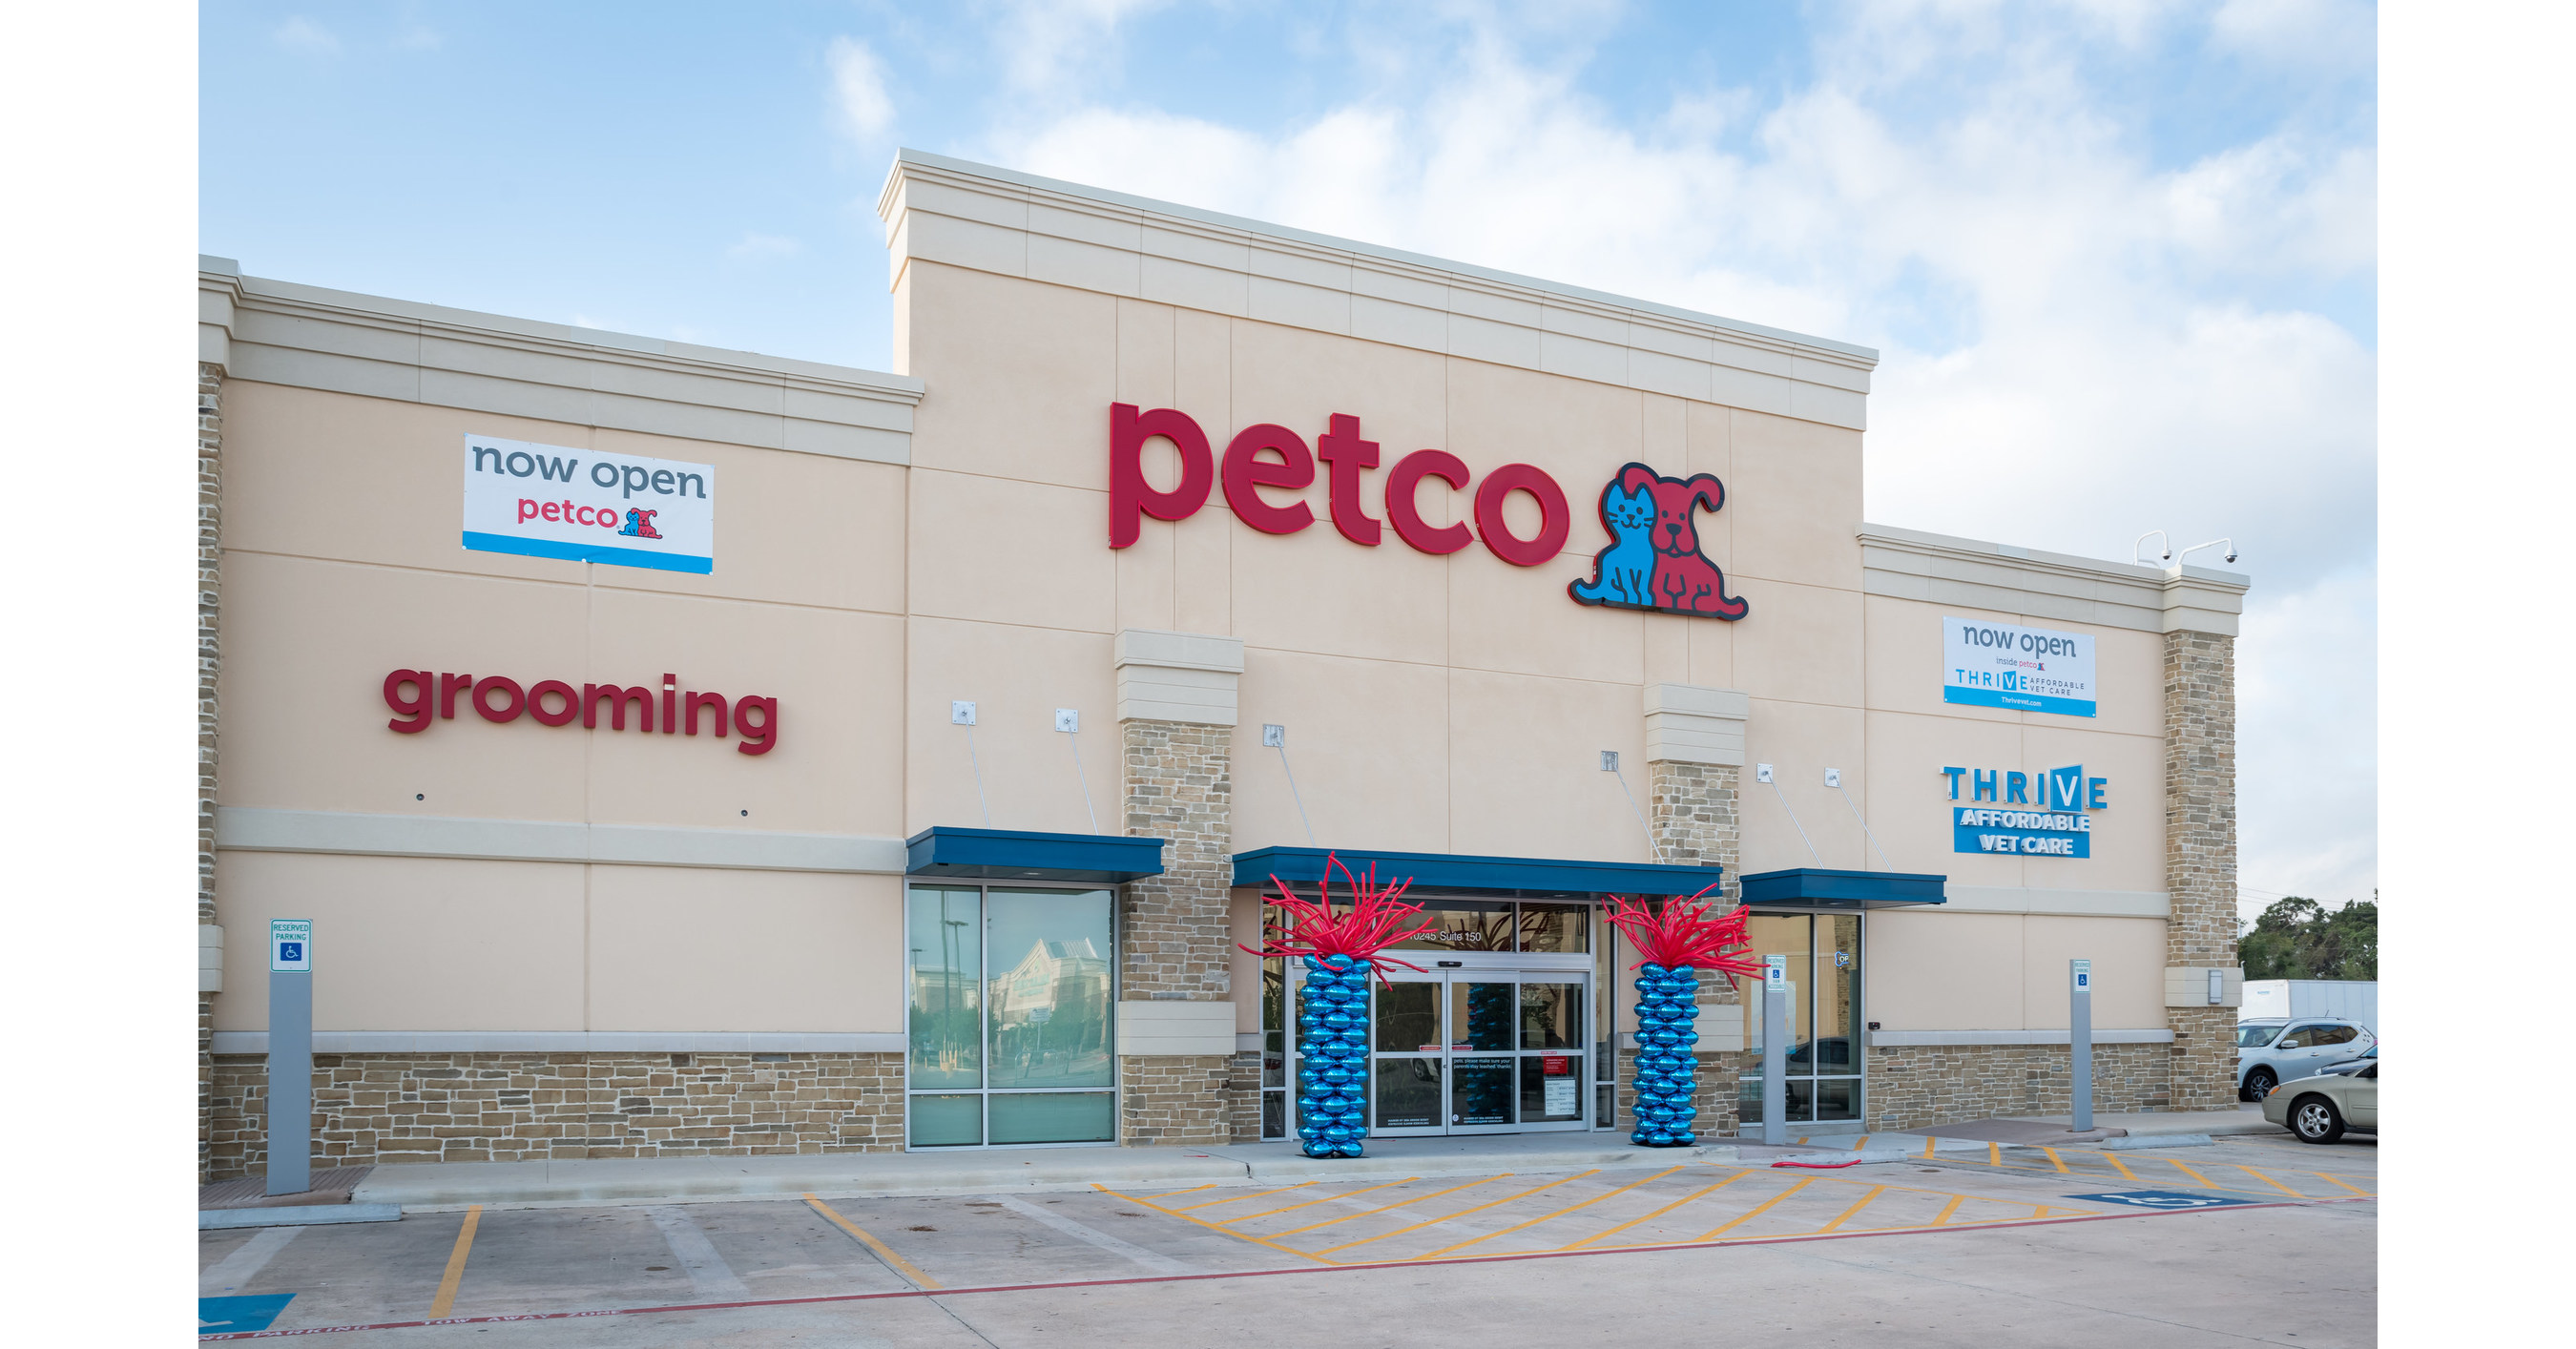 Petco Expands Pet Services Offerings to Include Complete Vet Care